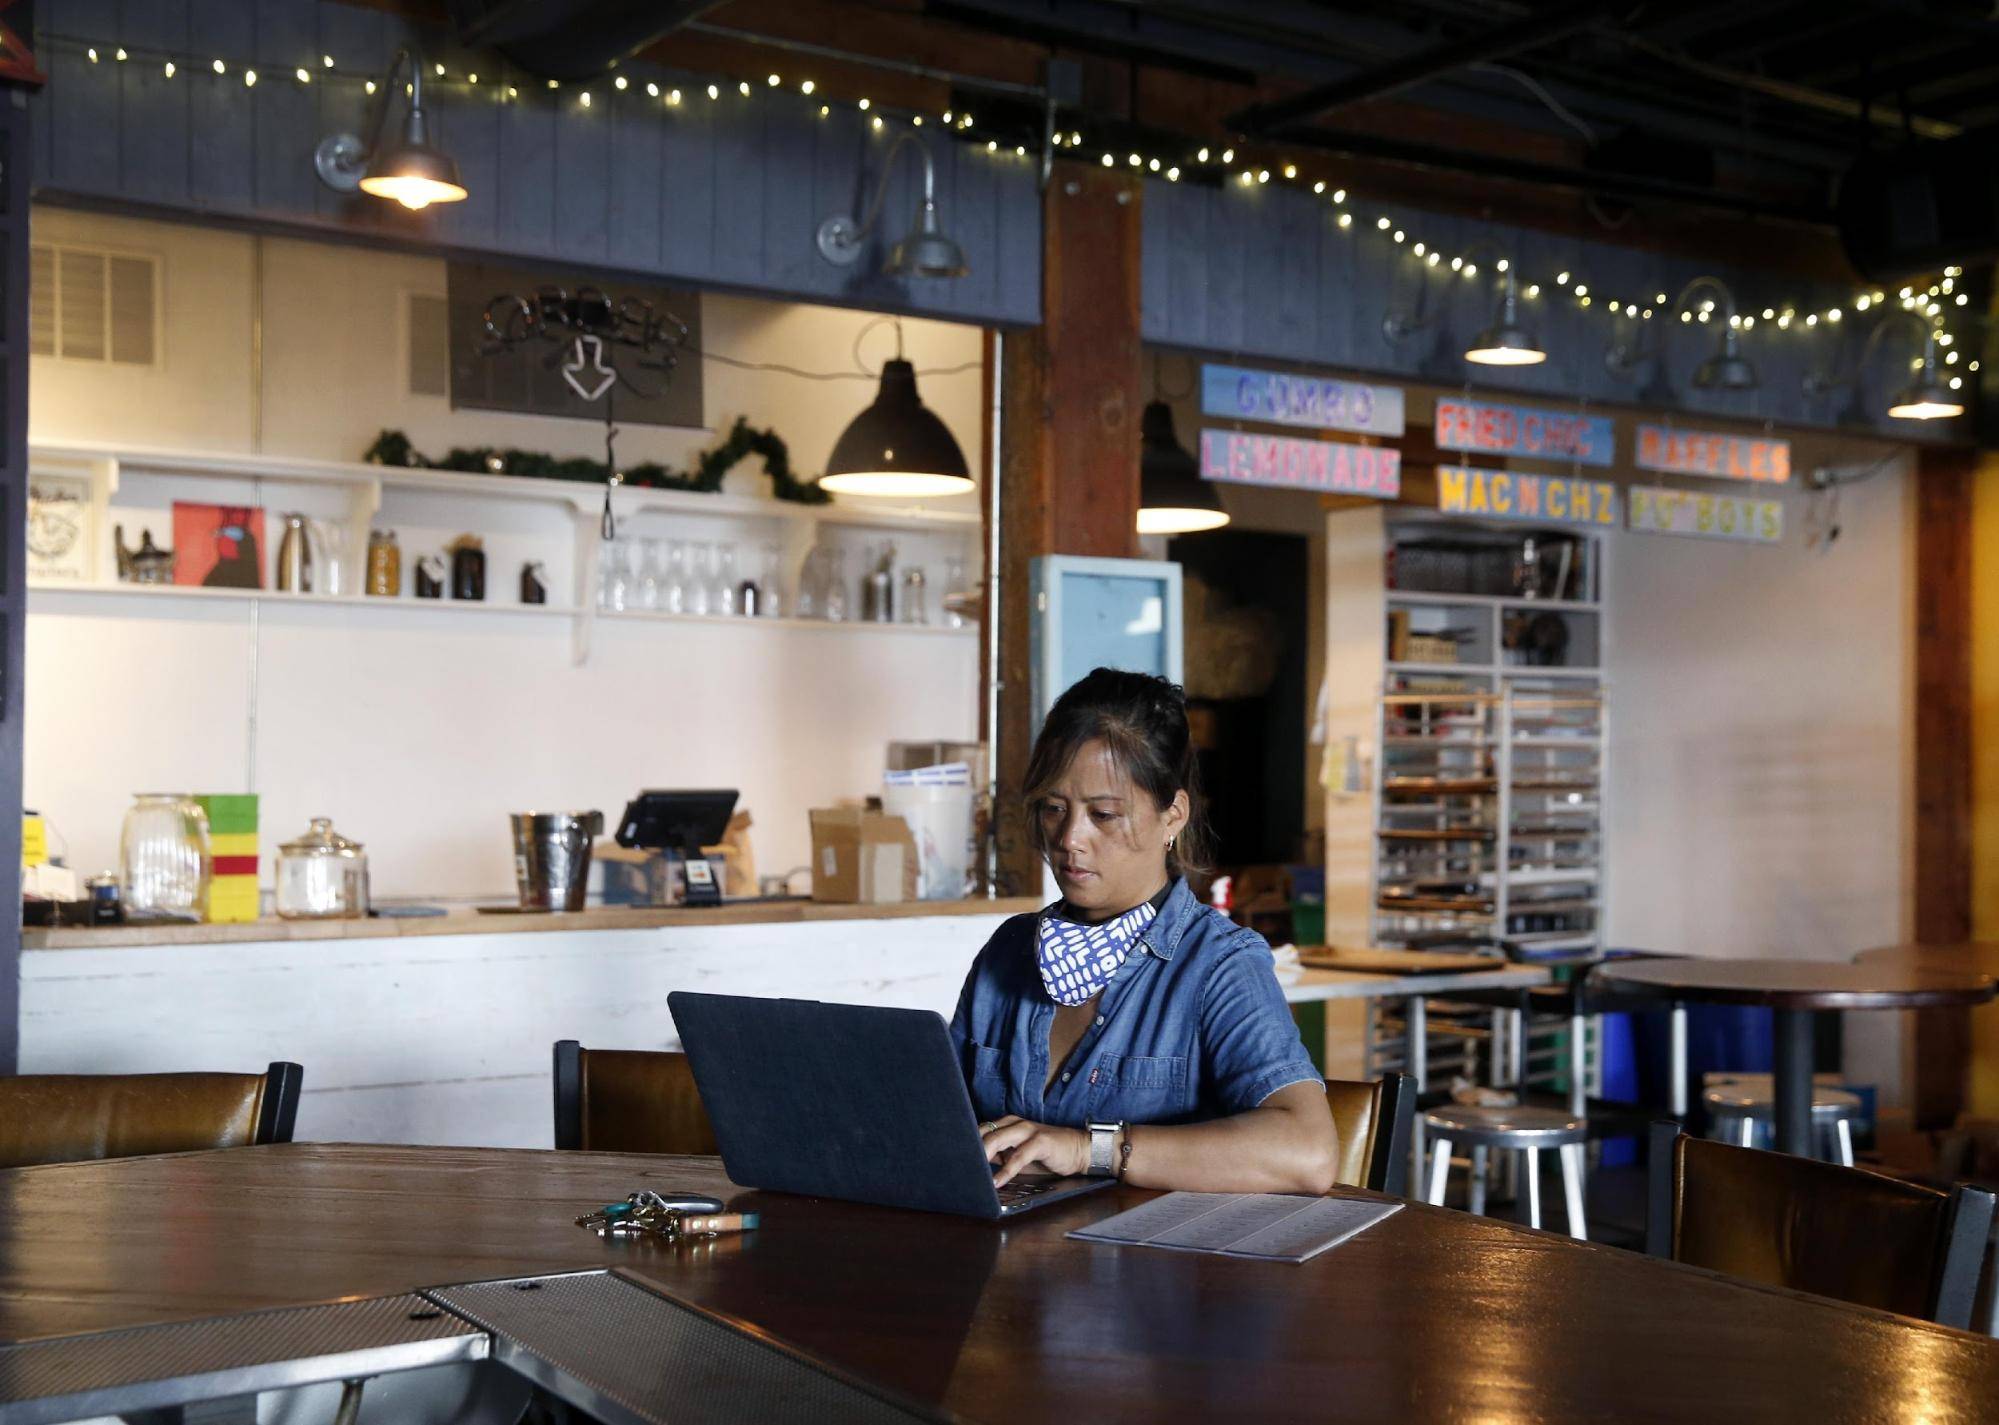 3 most common SBA loans: person working at a laptop at a table in an empty cafe